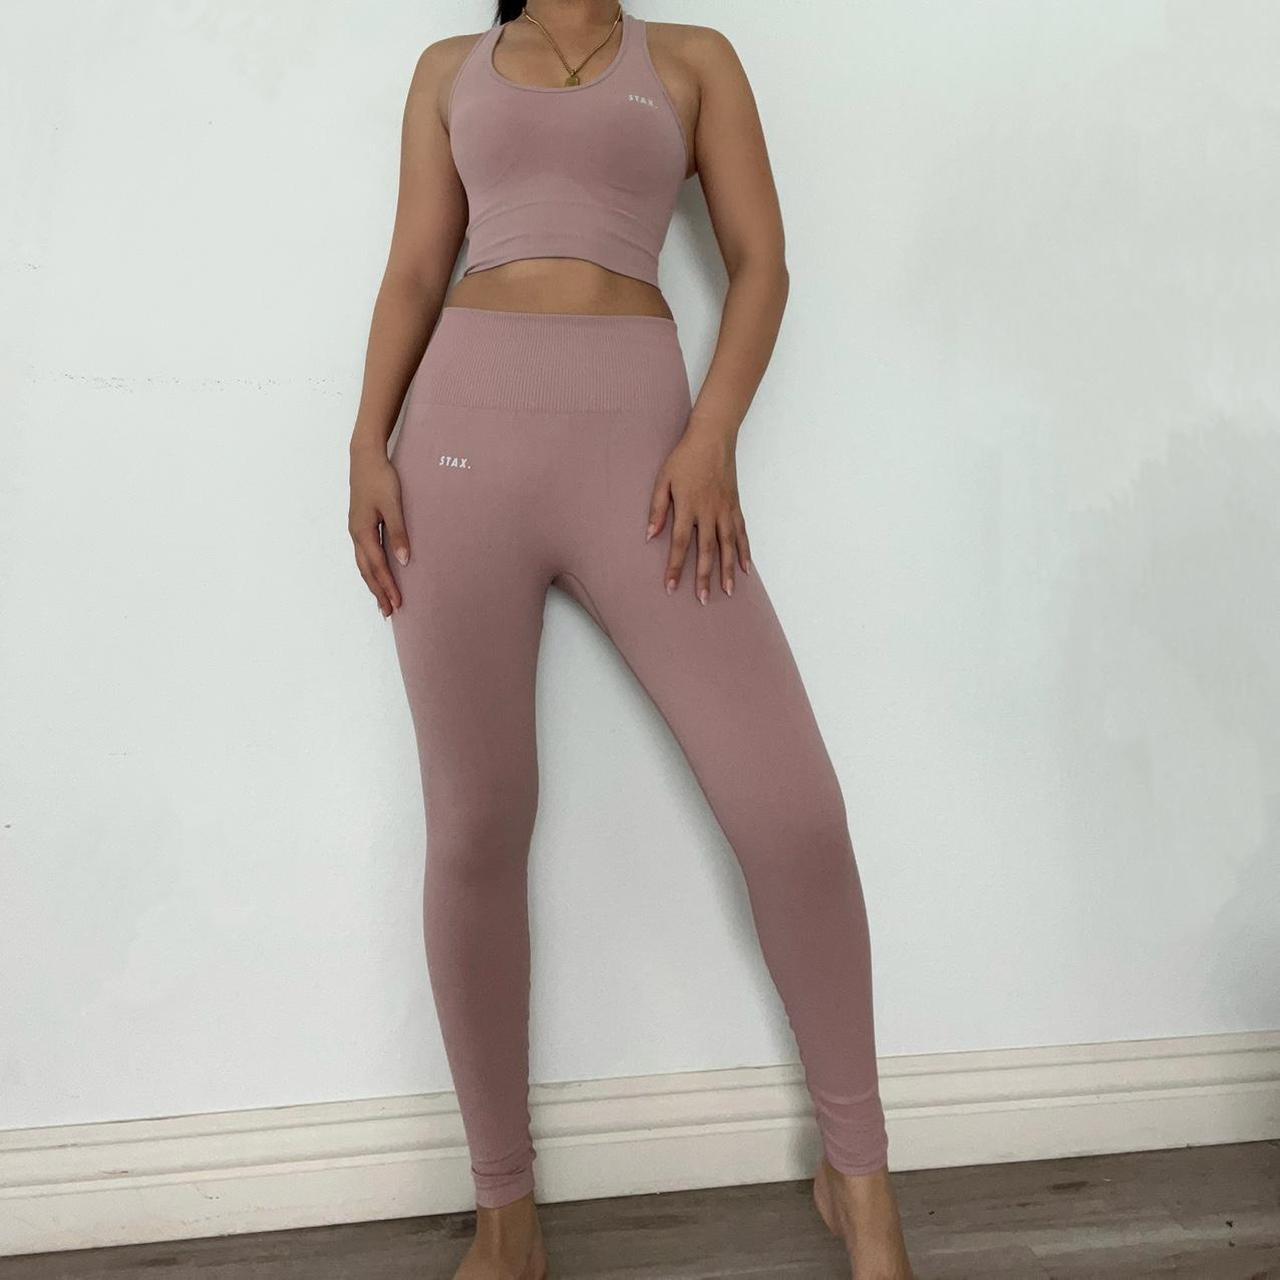 Stax legging set in mauve. So comfy and so stretchy!... - Depop